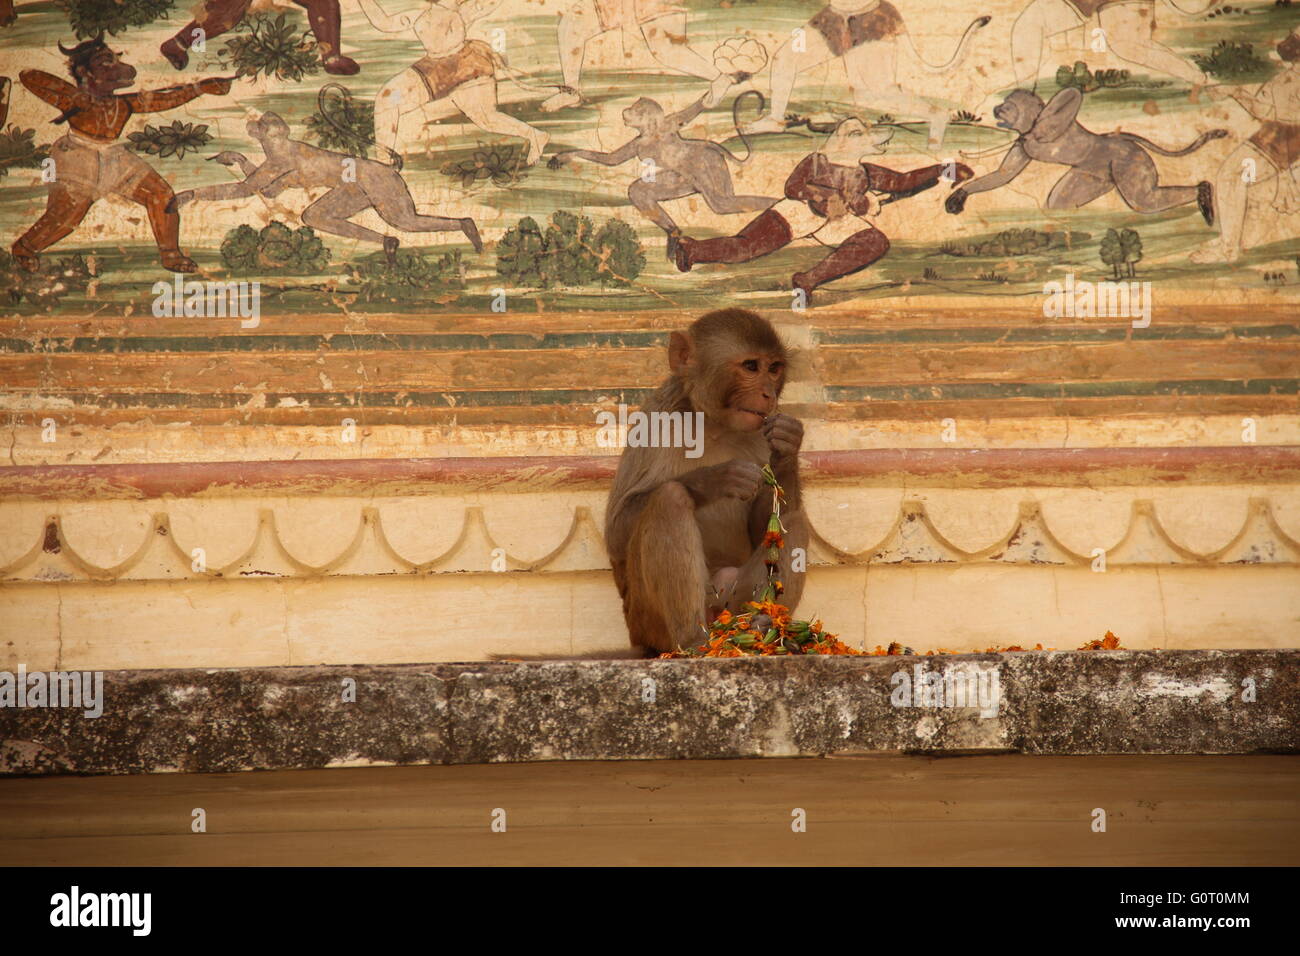 It is a picture of a monkey eating flowers in Galtaji (Monkey Temple) in Jaipur, India. Stock Photo